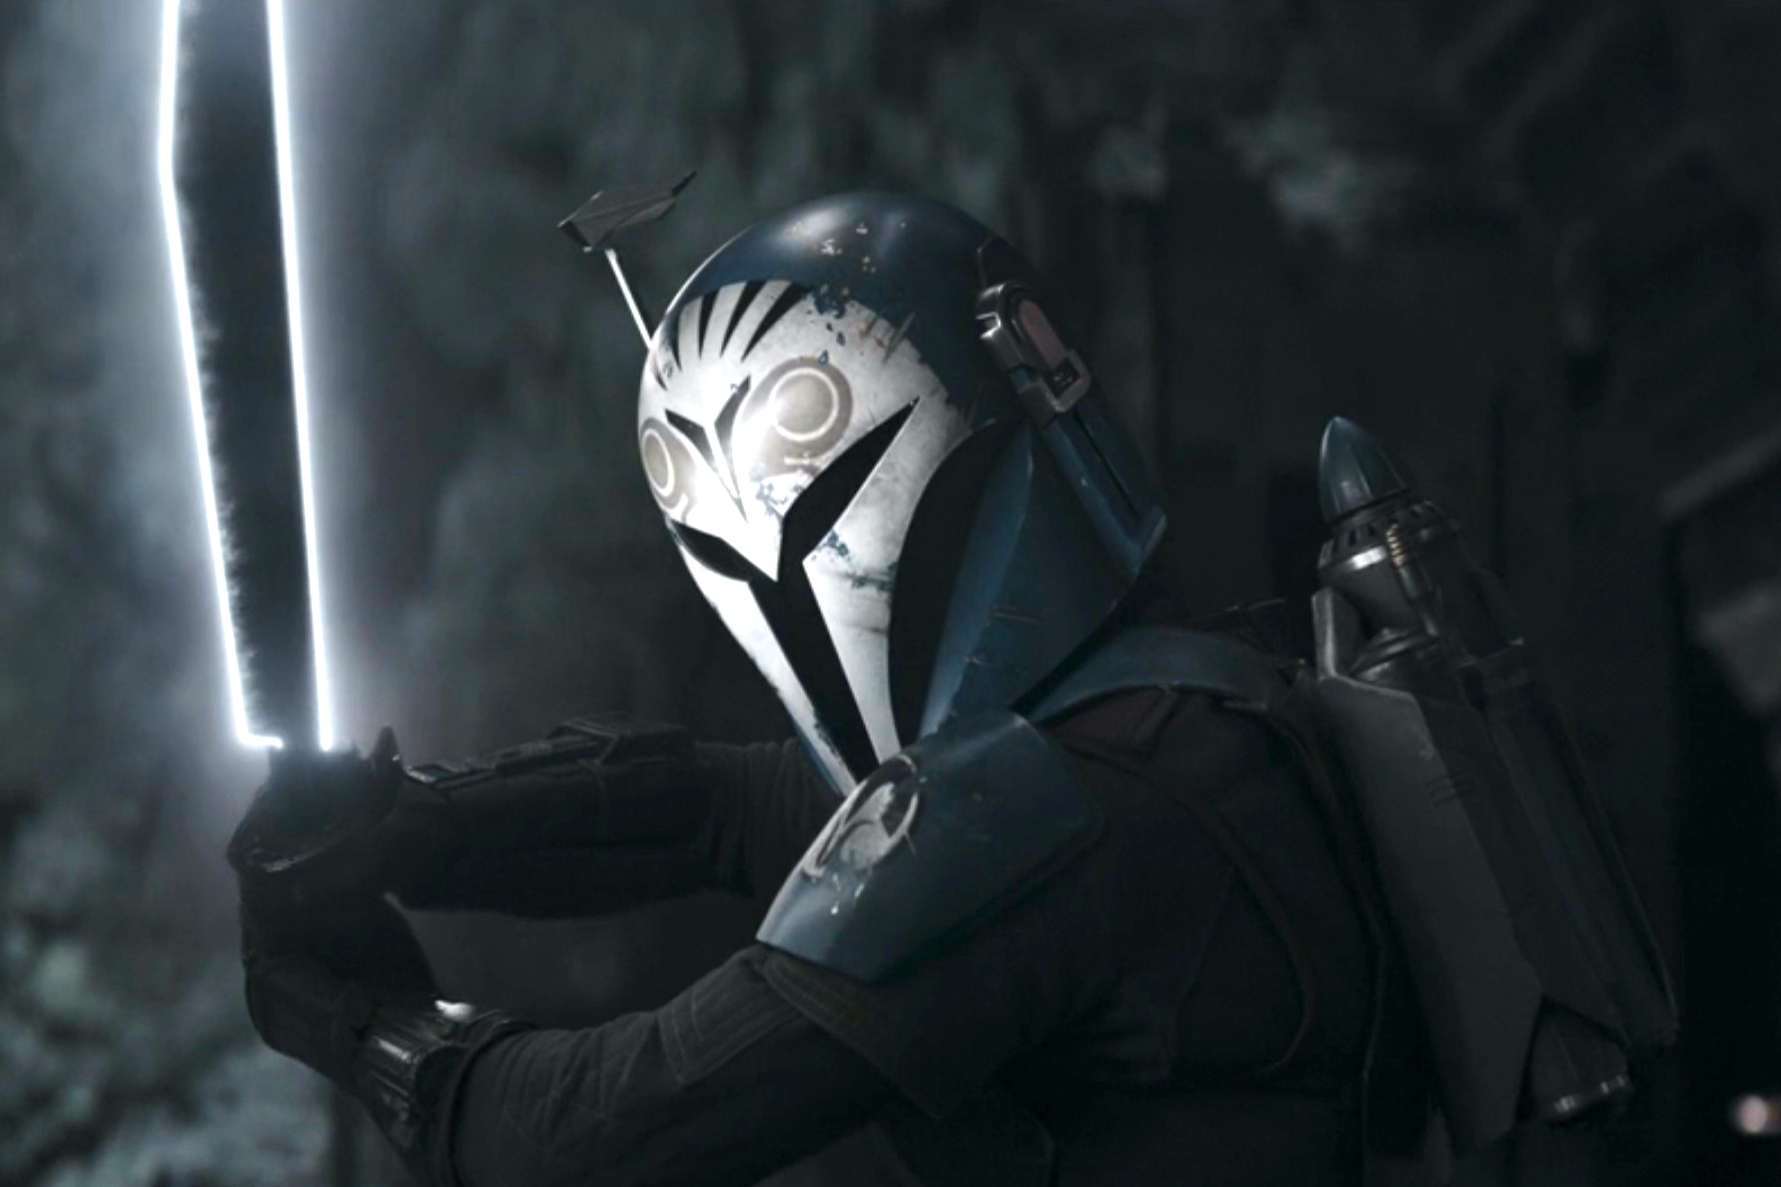 Mandalorian' Season 2 Finale Officially Show's Highest-Rated